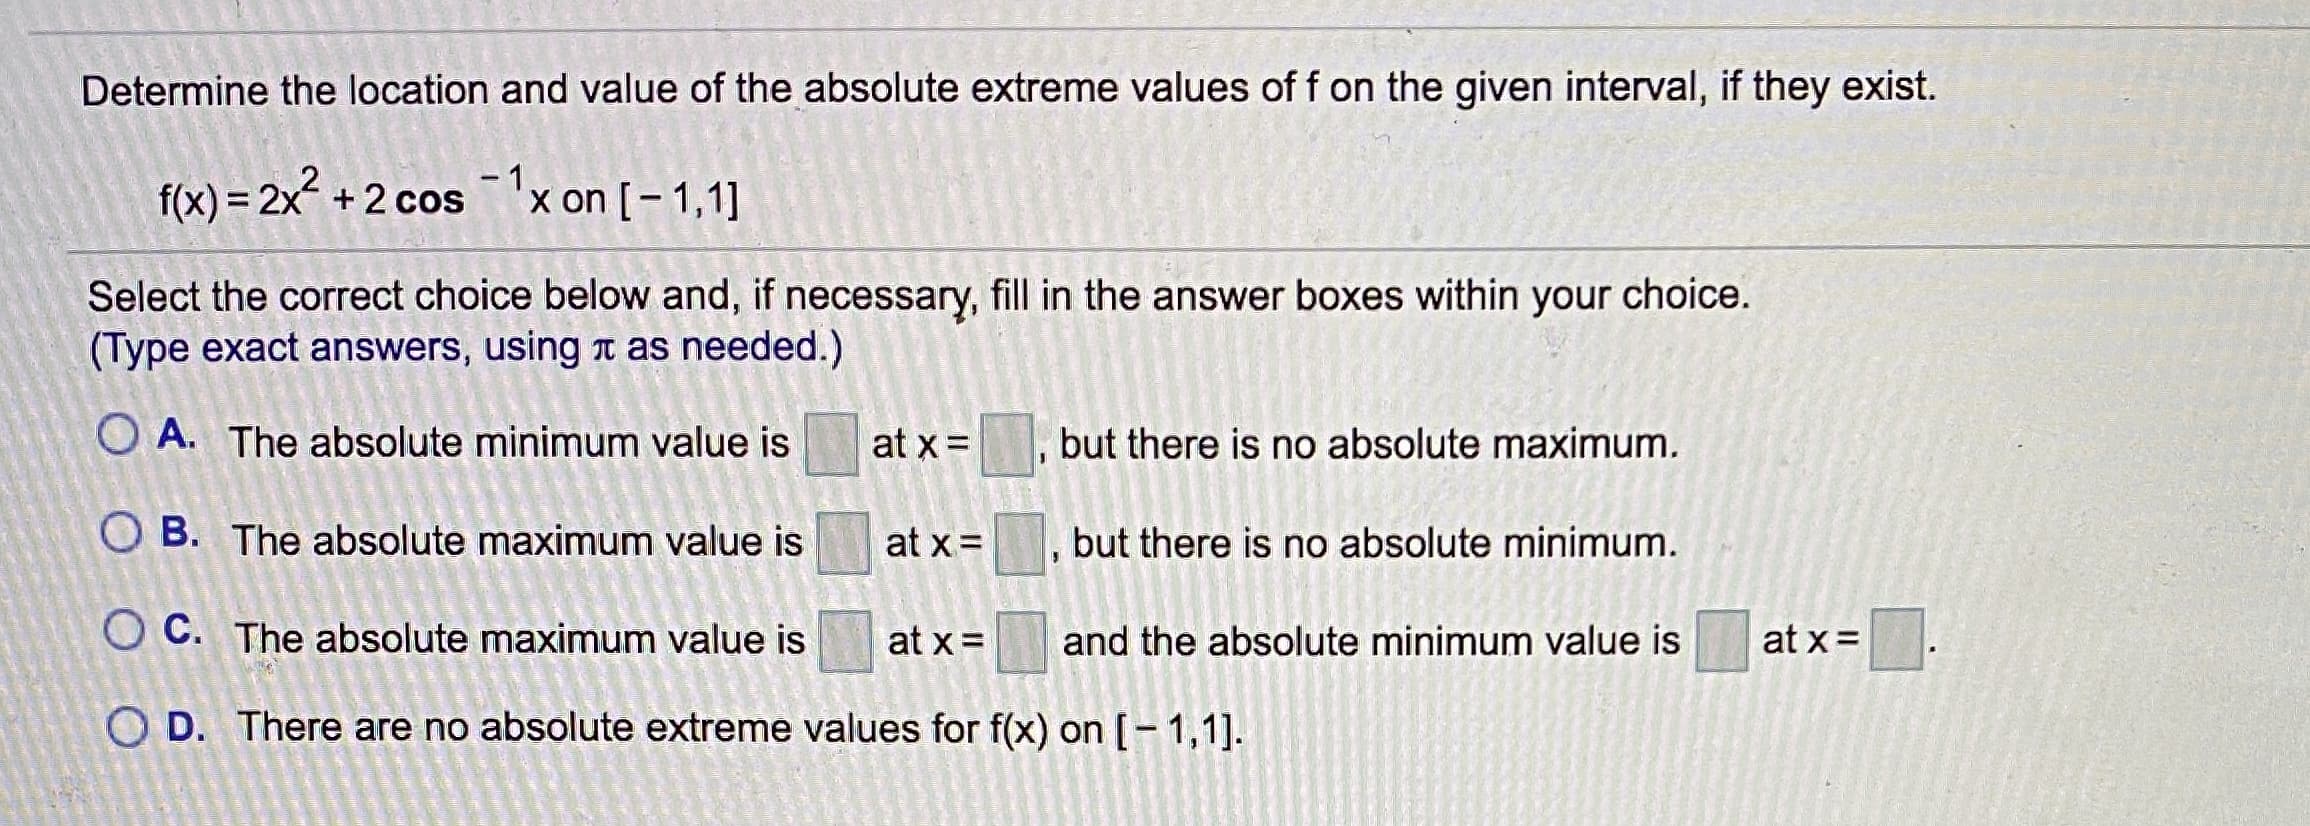 Determine the location and value of the absolute extreme values of f on the given interval, if they exist.
f(x) = 2x² +2 cos'x on [- 1,1]
-1x on [- 1,1]
Select the correct choice below and, if necessary, fill in the answer boxes within your choice.
(Type exact answers, using t as needed.)
O A. The absolute minimum value is
at x=
but there is no absolute maximum.
O B. The absolute maximum value is
at x =
but there is no absolute minimum.
O C. The absolute maximum value is
at x =
and the absolute minimum value is
at x =
O D. There are no absolute extreme values for f(x) on [-1,1].
